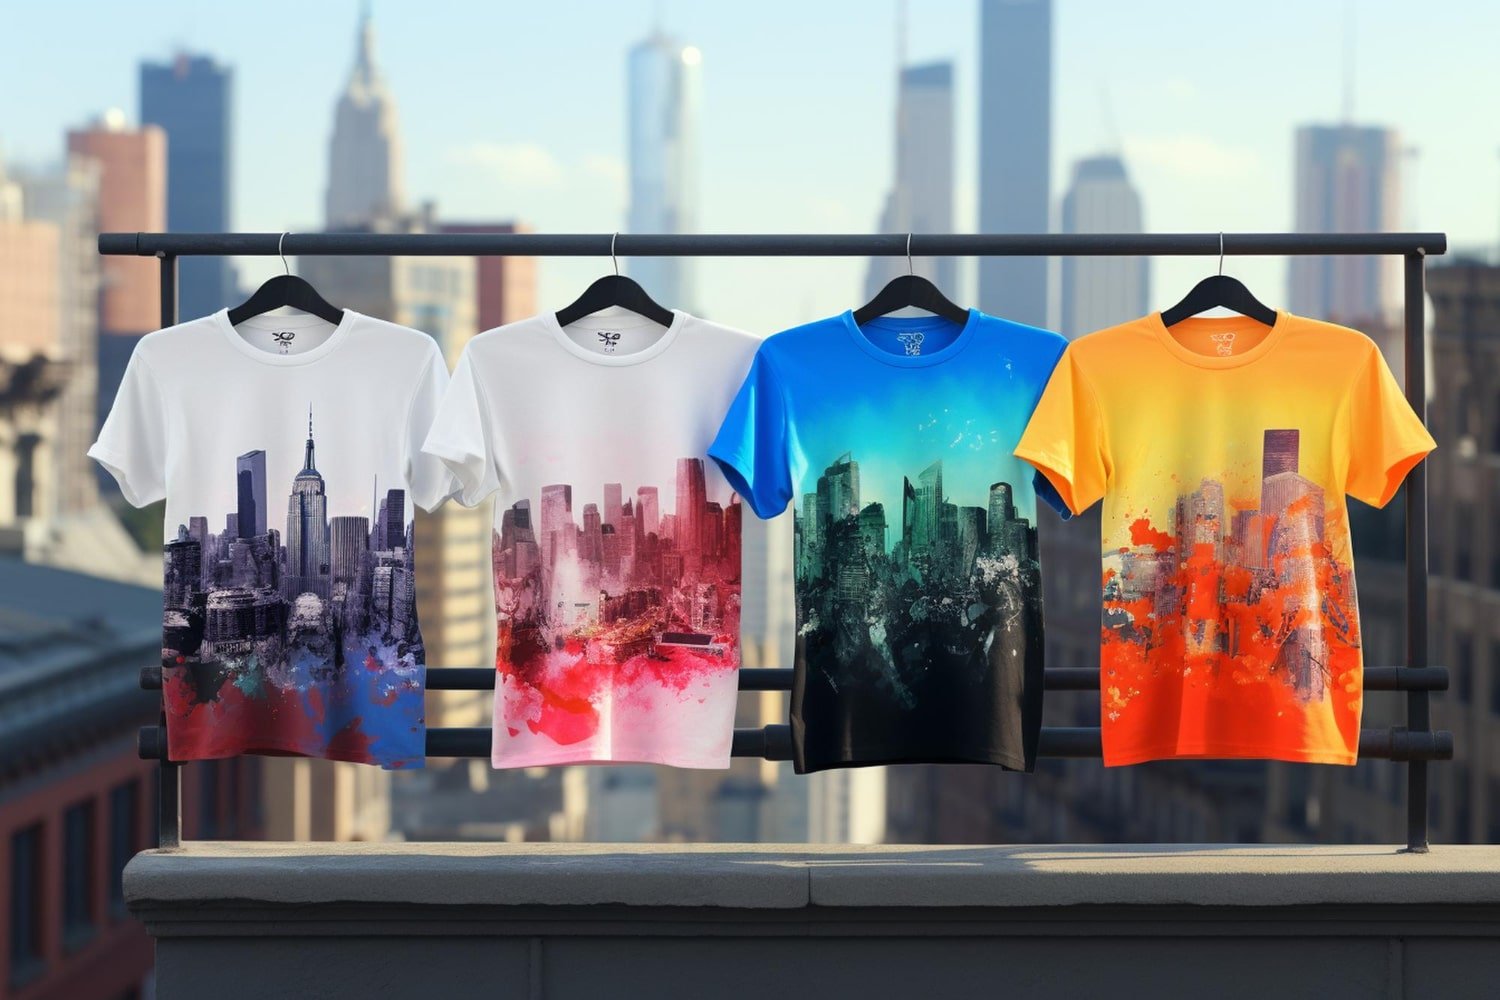 Find Quality T-Shirts For Printing At www.buytshirtsonline.co.uk